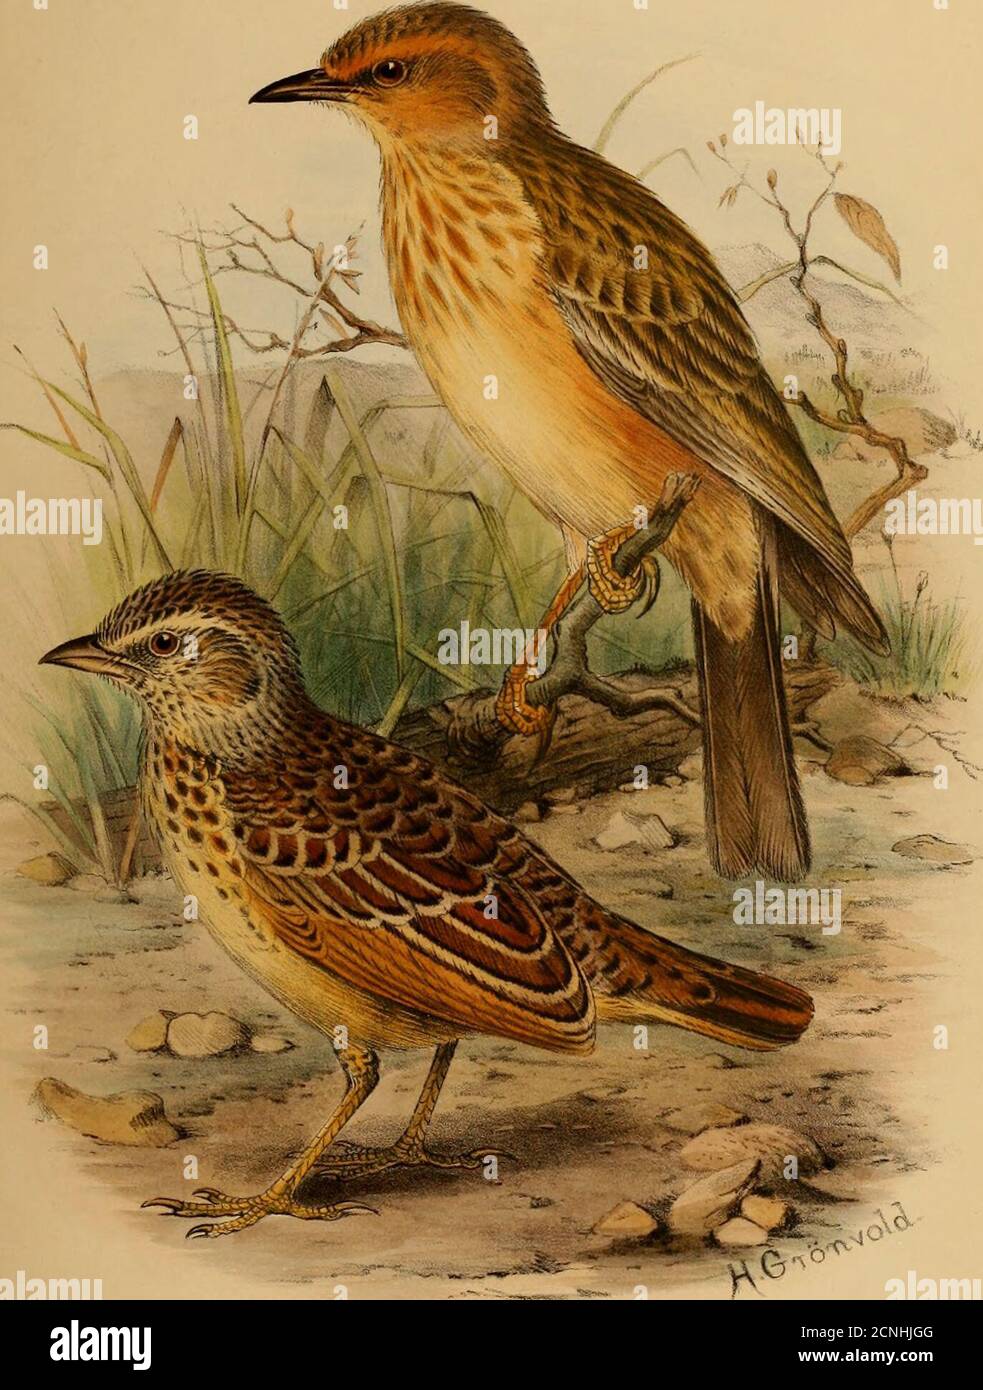 . The birds of Africa, comprising all the species which occur in the Ethiopian region . 9, p. 353 Kibaradja.Mirafra paecilosterna, Sharpe, Cat. B. M. xiii. p. 612 note (1890) ;Eeichen. Vog. D. O. Afr. p. 203 (1894) Pare, Arusha, Masai;Shelley, B. Afr. No. 210 (1896).Megalophonus massaicus, Fisch. and Eeichen. J. f. 0. 1884, p. 55, Little Arusha.Adult. Similar to M. gilleti, from which it differs in having the upperparts rather less mottled ; a grey shade on the crown ; pale portion ofsides of head cinnamon instead of white ; under parts more rufous ;feathers of the lower throat with large unif Stock Photo